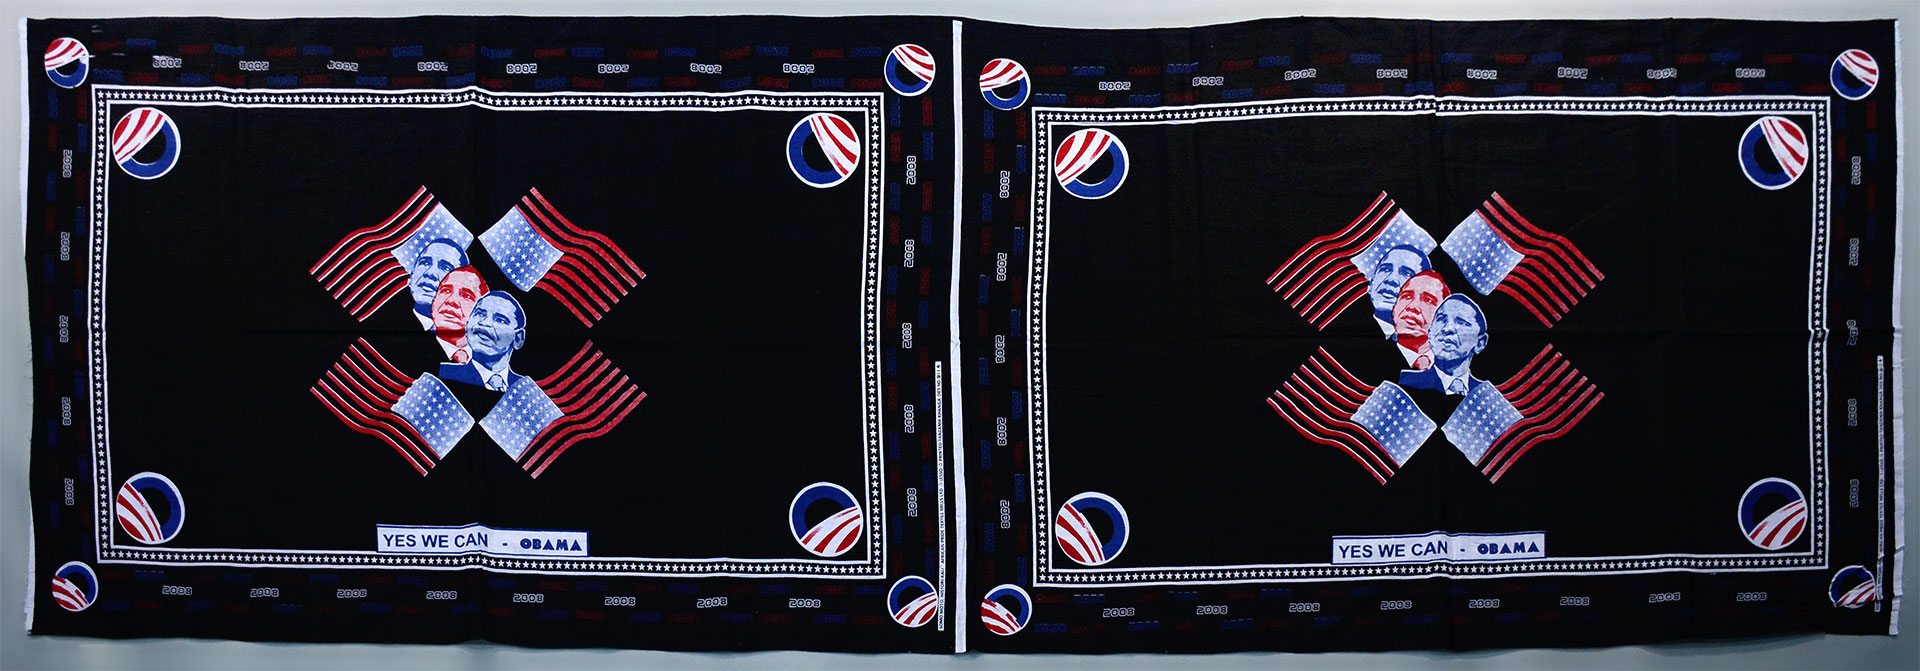 Two panel black fabric with Obama images, american flag, and campaign logo printed in red white and blue